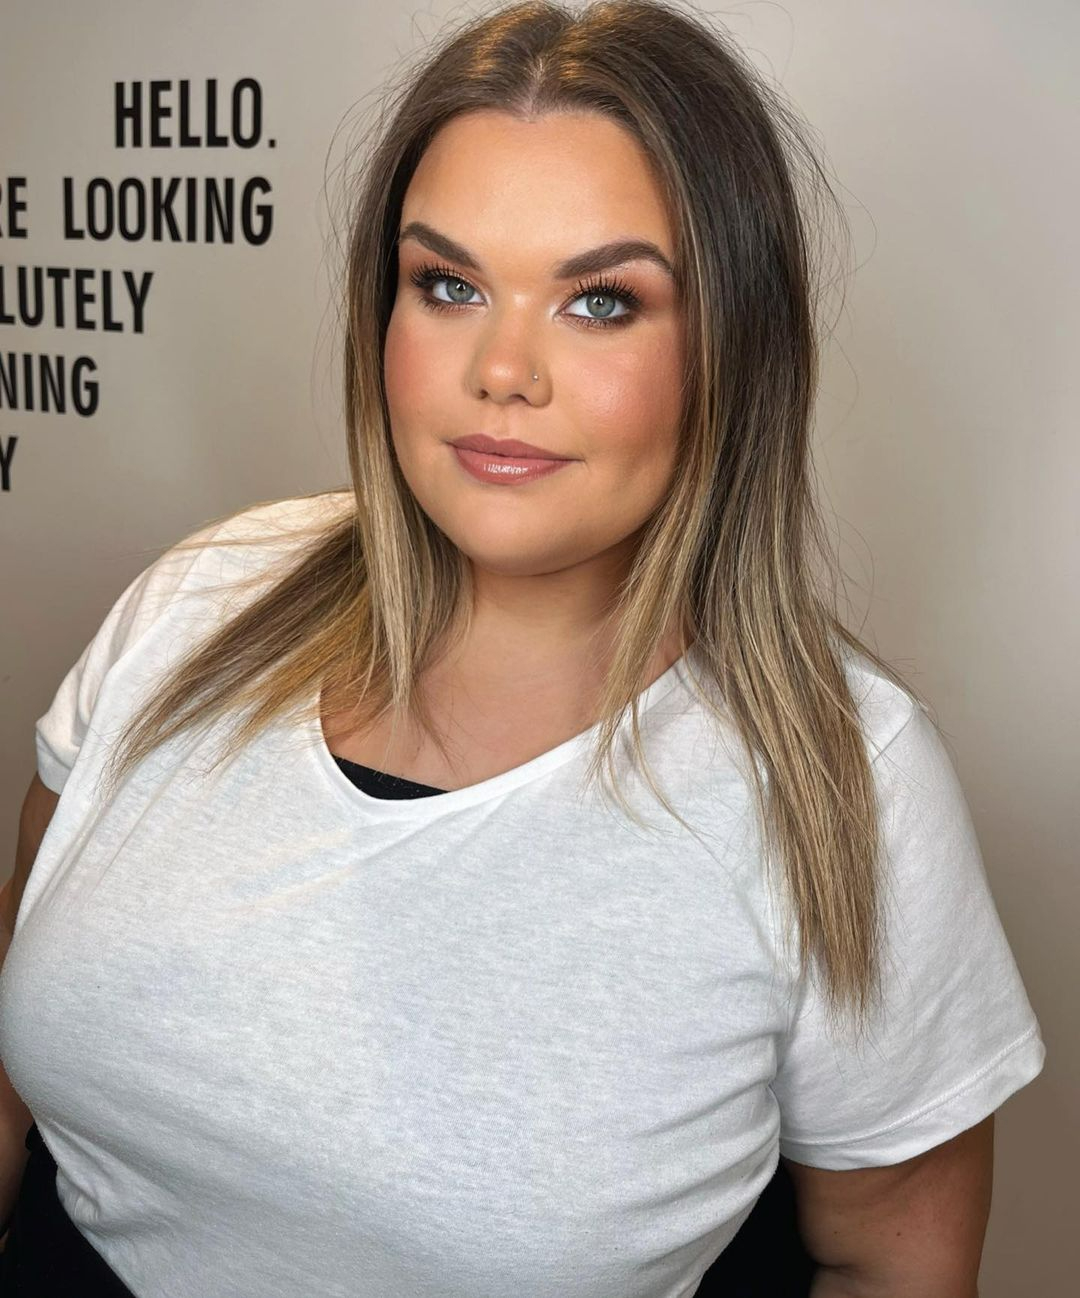 Gogglebox Amy Tapper looks slimmer than ever in new snap after glam makeover